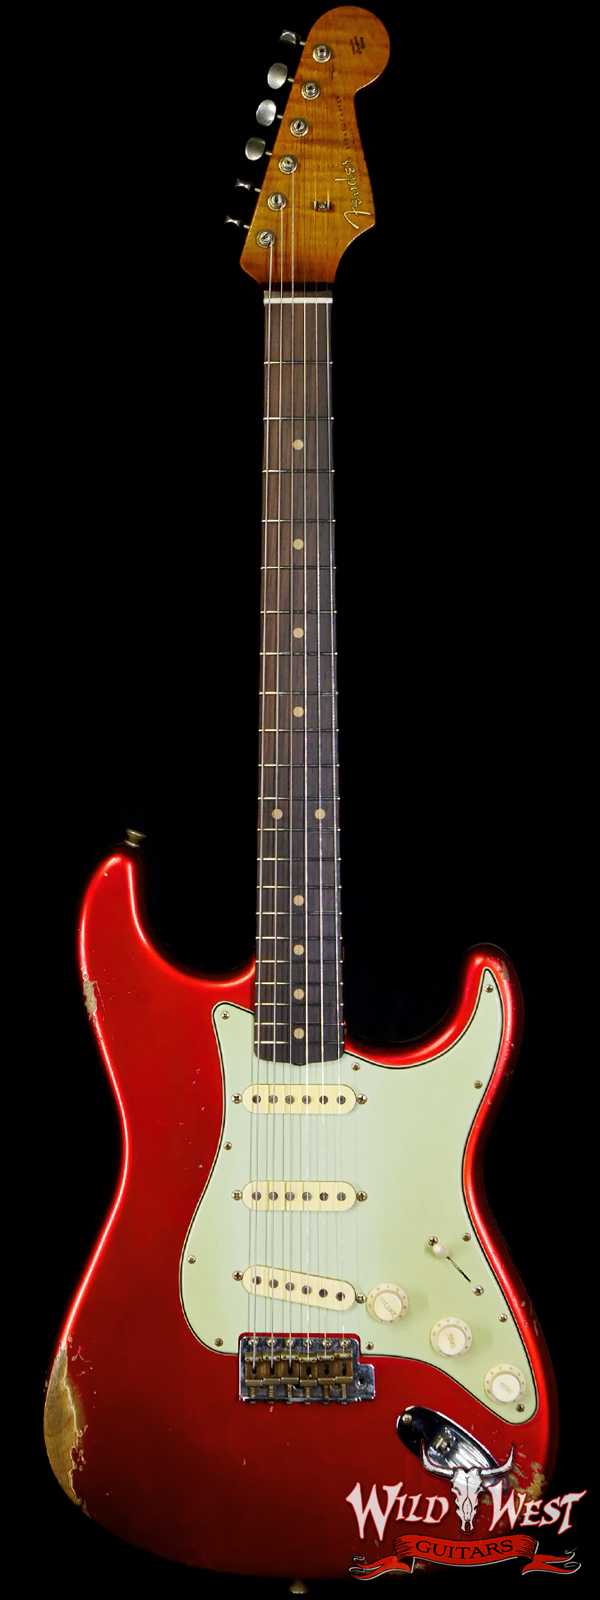 Fender Custom Shop Andy Hicks Masterbuilt 1961 Stratocaster Roasted Flame Maple Neck Brazilian Rosewood Board Relic Candy Apple Red